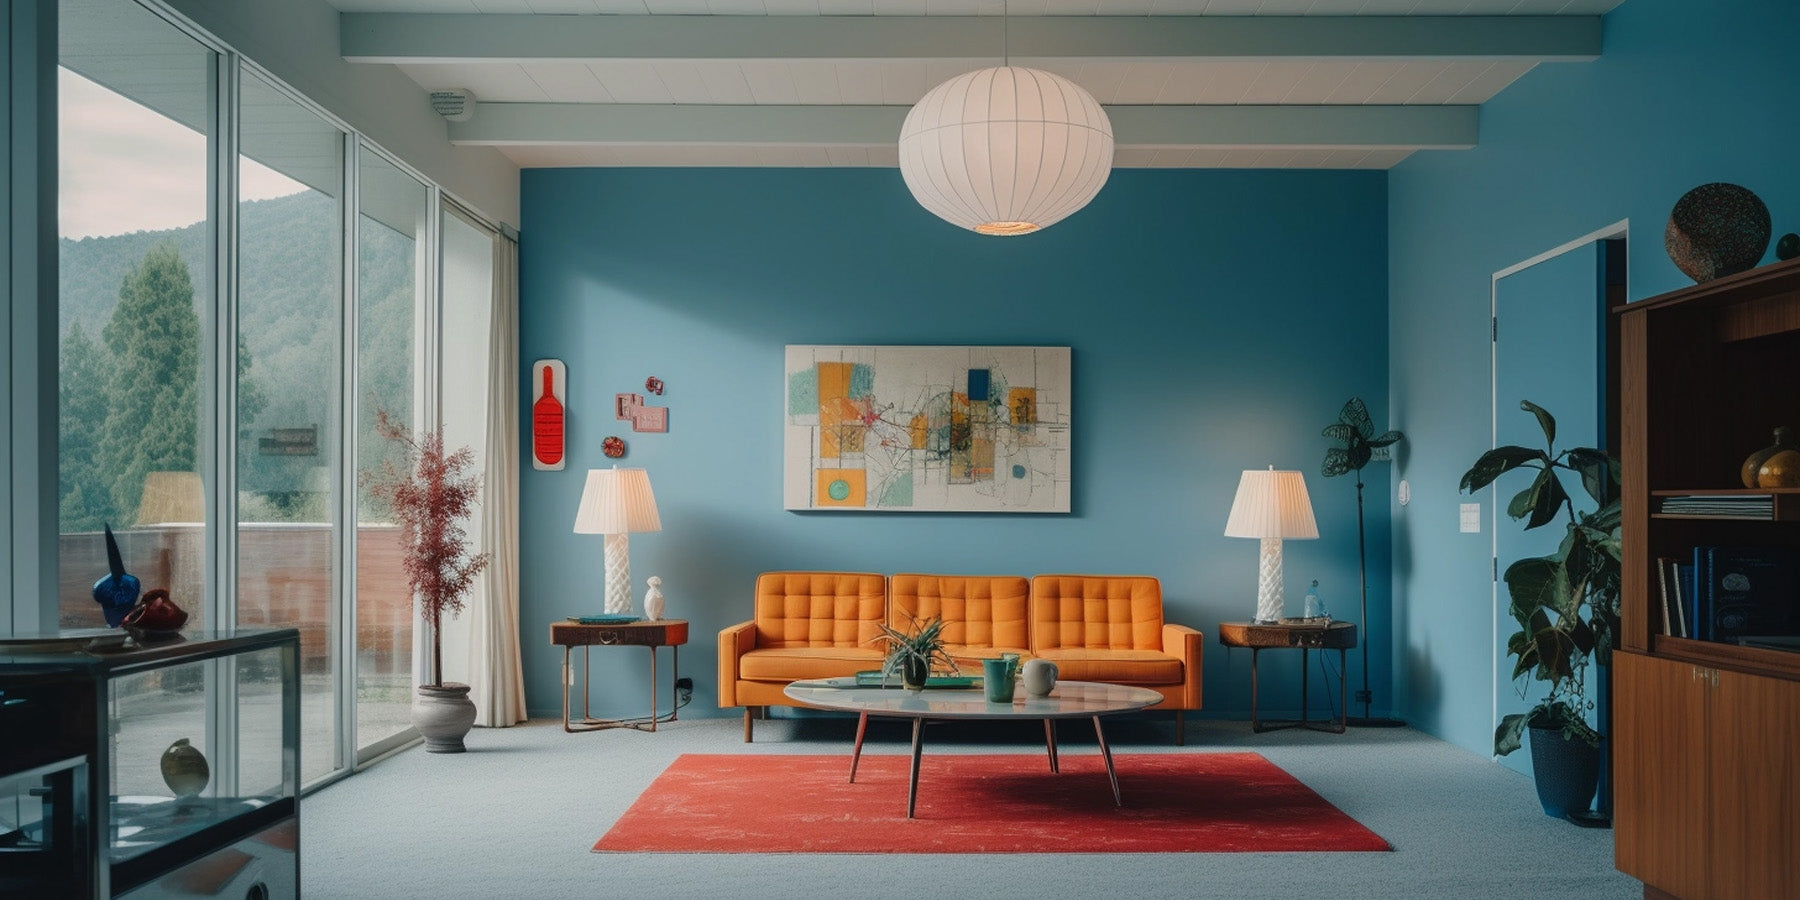 A vintage mid-century modern living room with blue walls and an orange couch